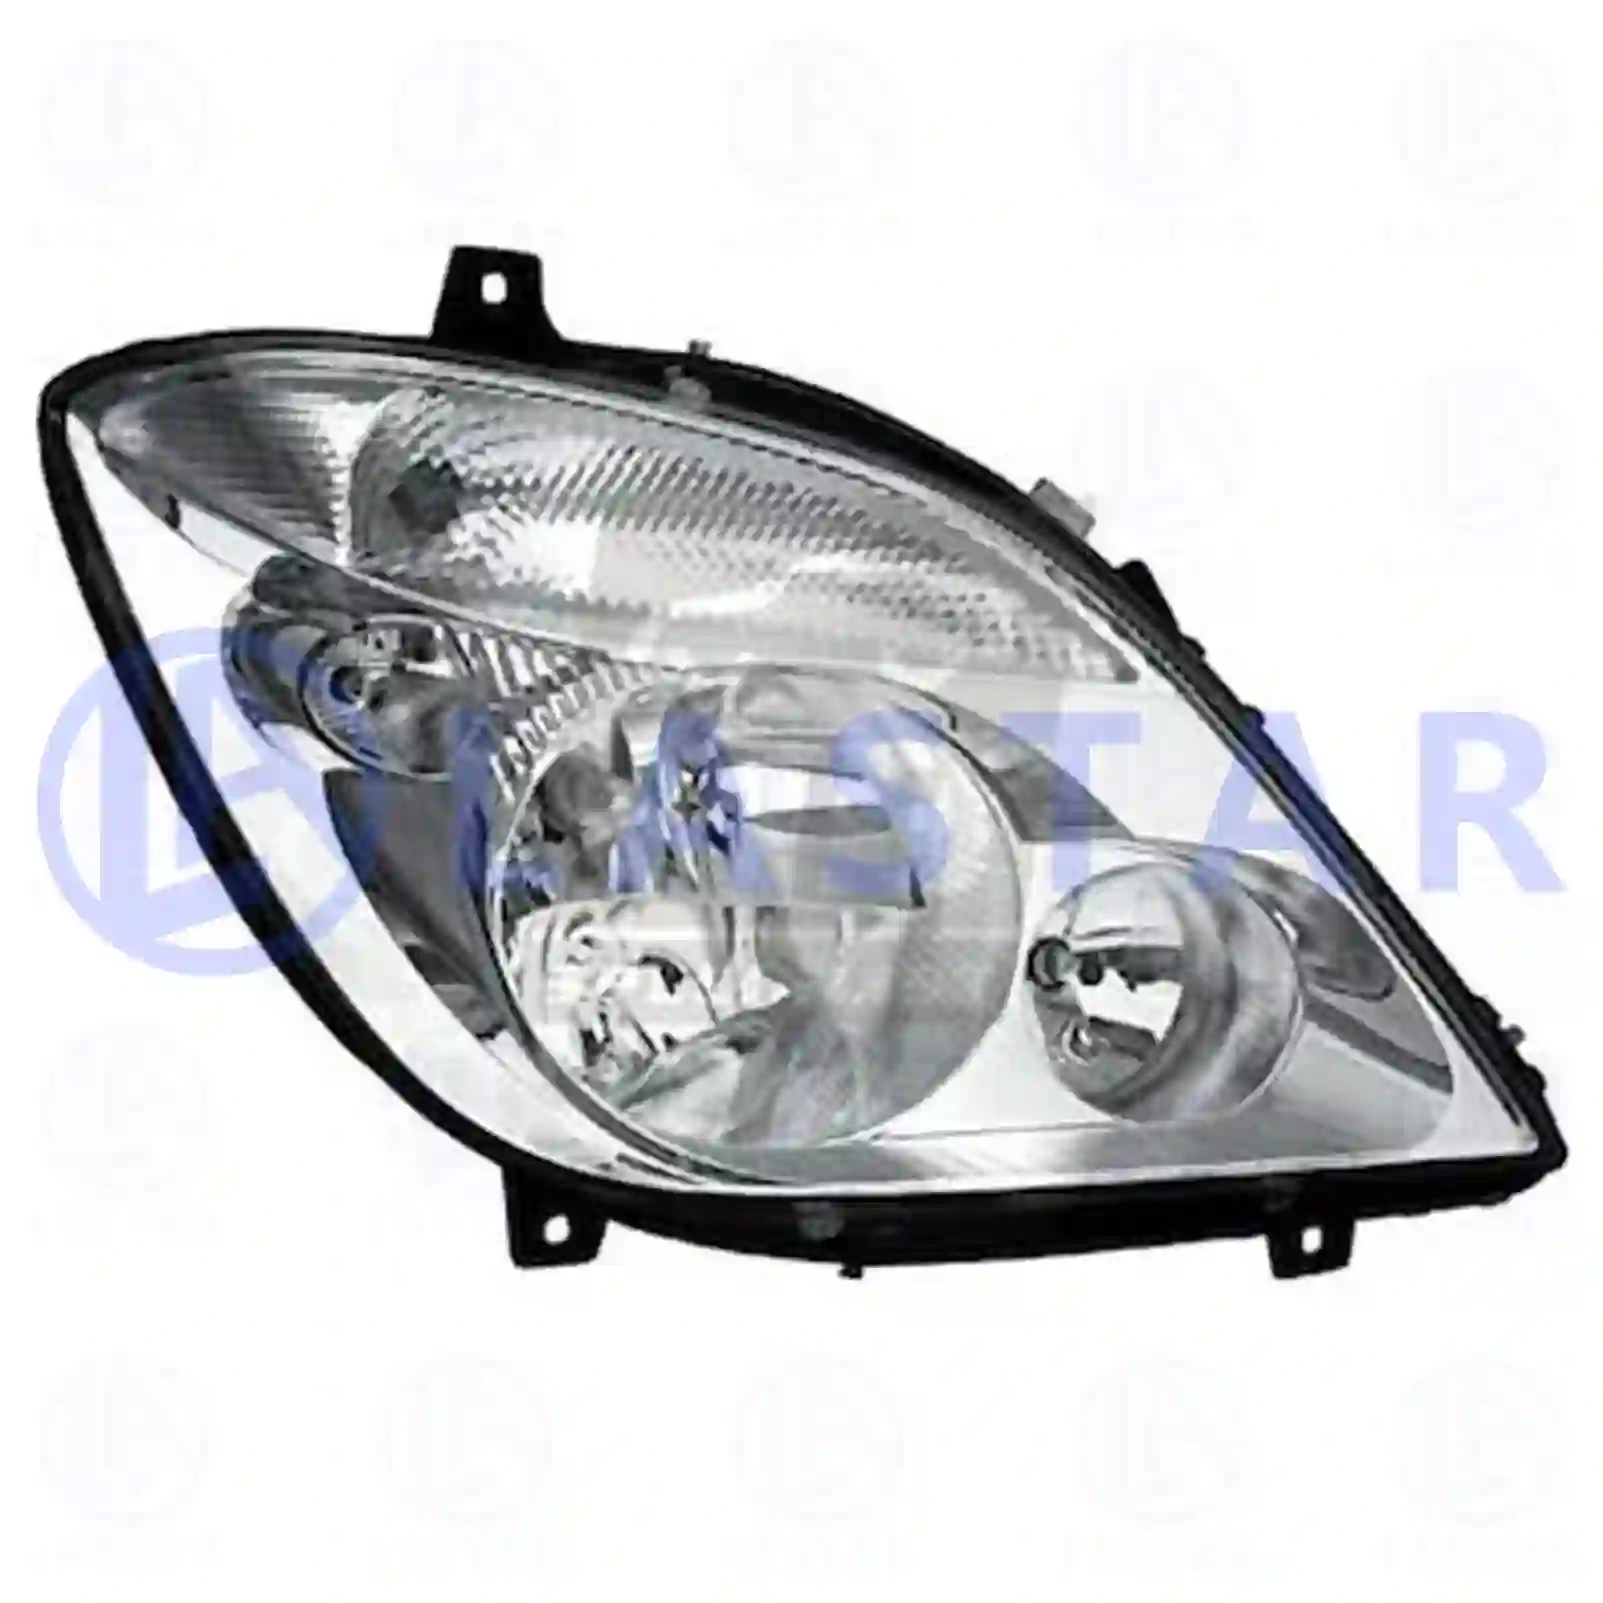 Headlamp, right, without bulbs, 77712020, 9068200261, , , , , , , , , ||  77712020 Lastar Spare Part | Truck Spare Parts, Auotomotive Spare Parts Headlamp, right, without bulbs, 77712020, 9068200261, , , , , , , , , ||  77712020 Lastar Spare Part | Truck Spare Parts, Auotomotive Spare Parts